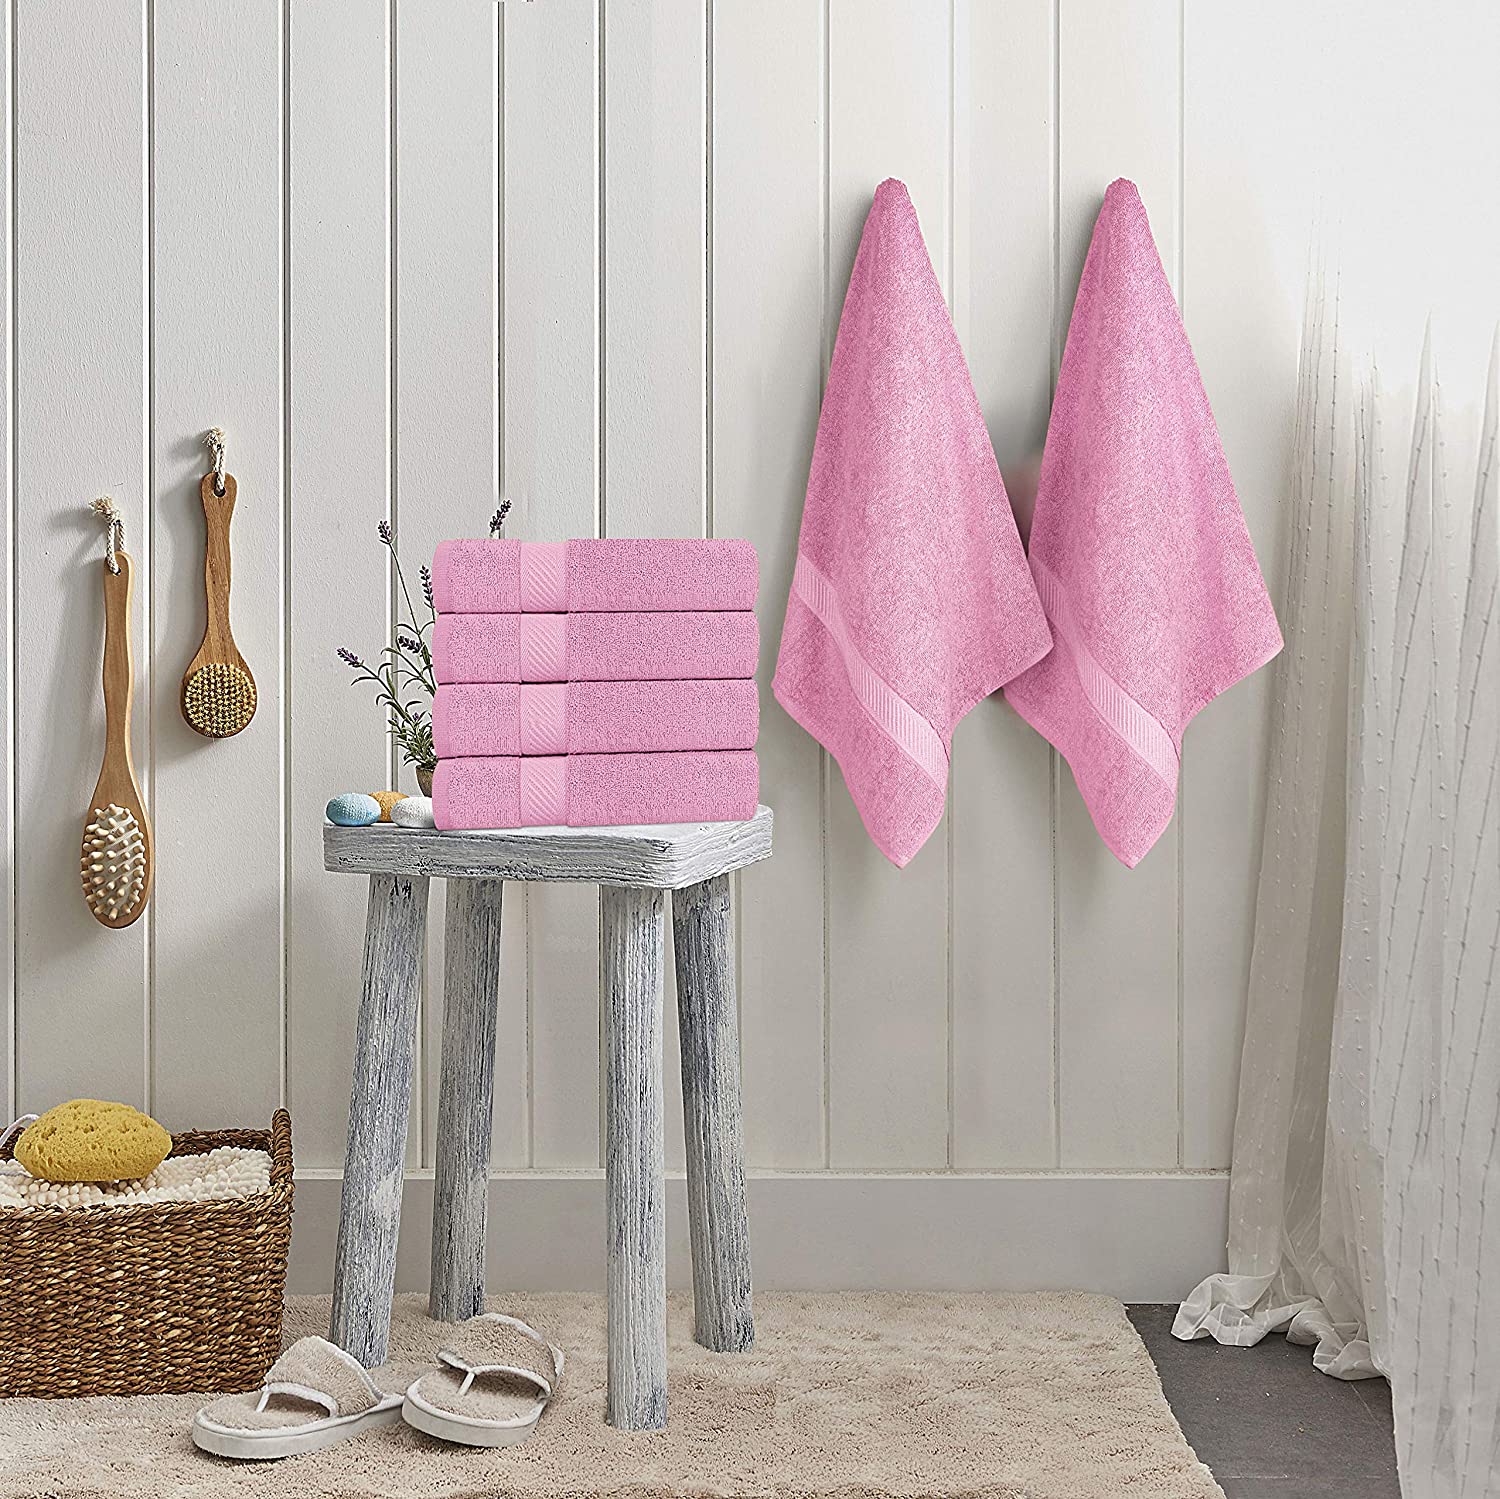 Shop 100% Goza Towels Cotton Bath Towels 2 Pack Online in the USA